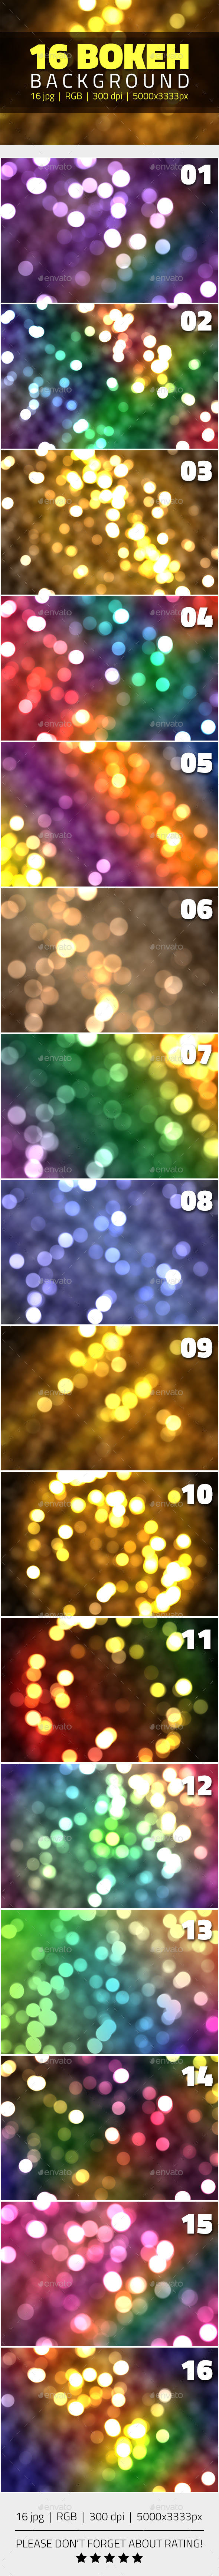 GraphicRiver Bokeh Backgrounds 20507587